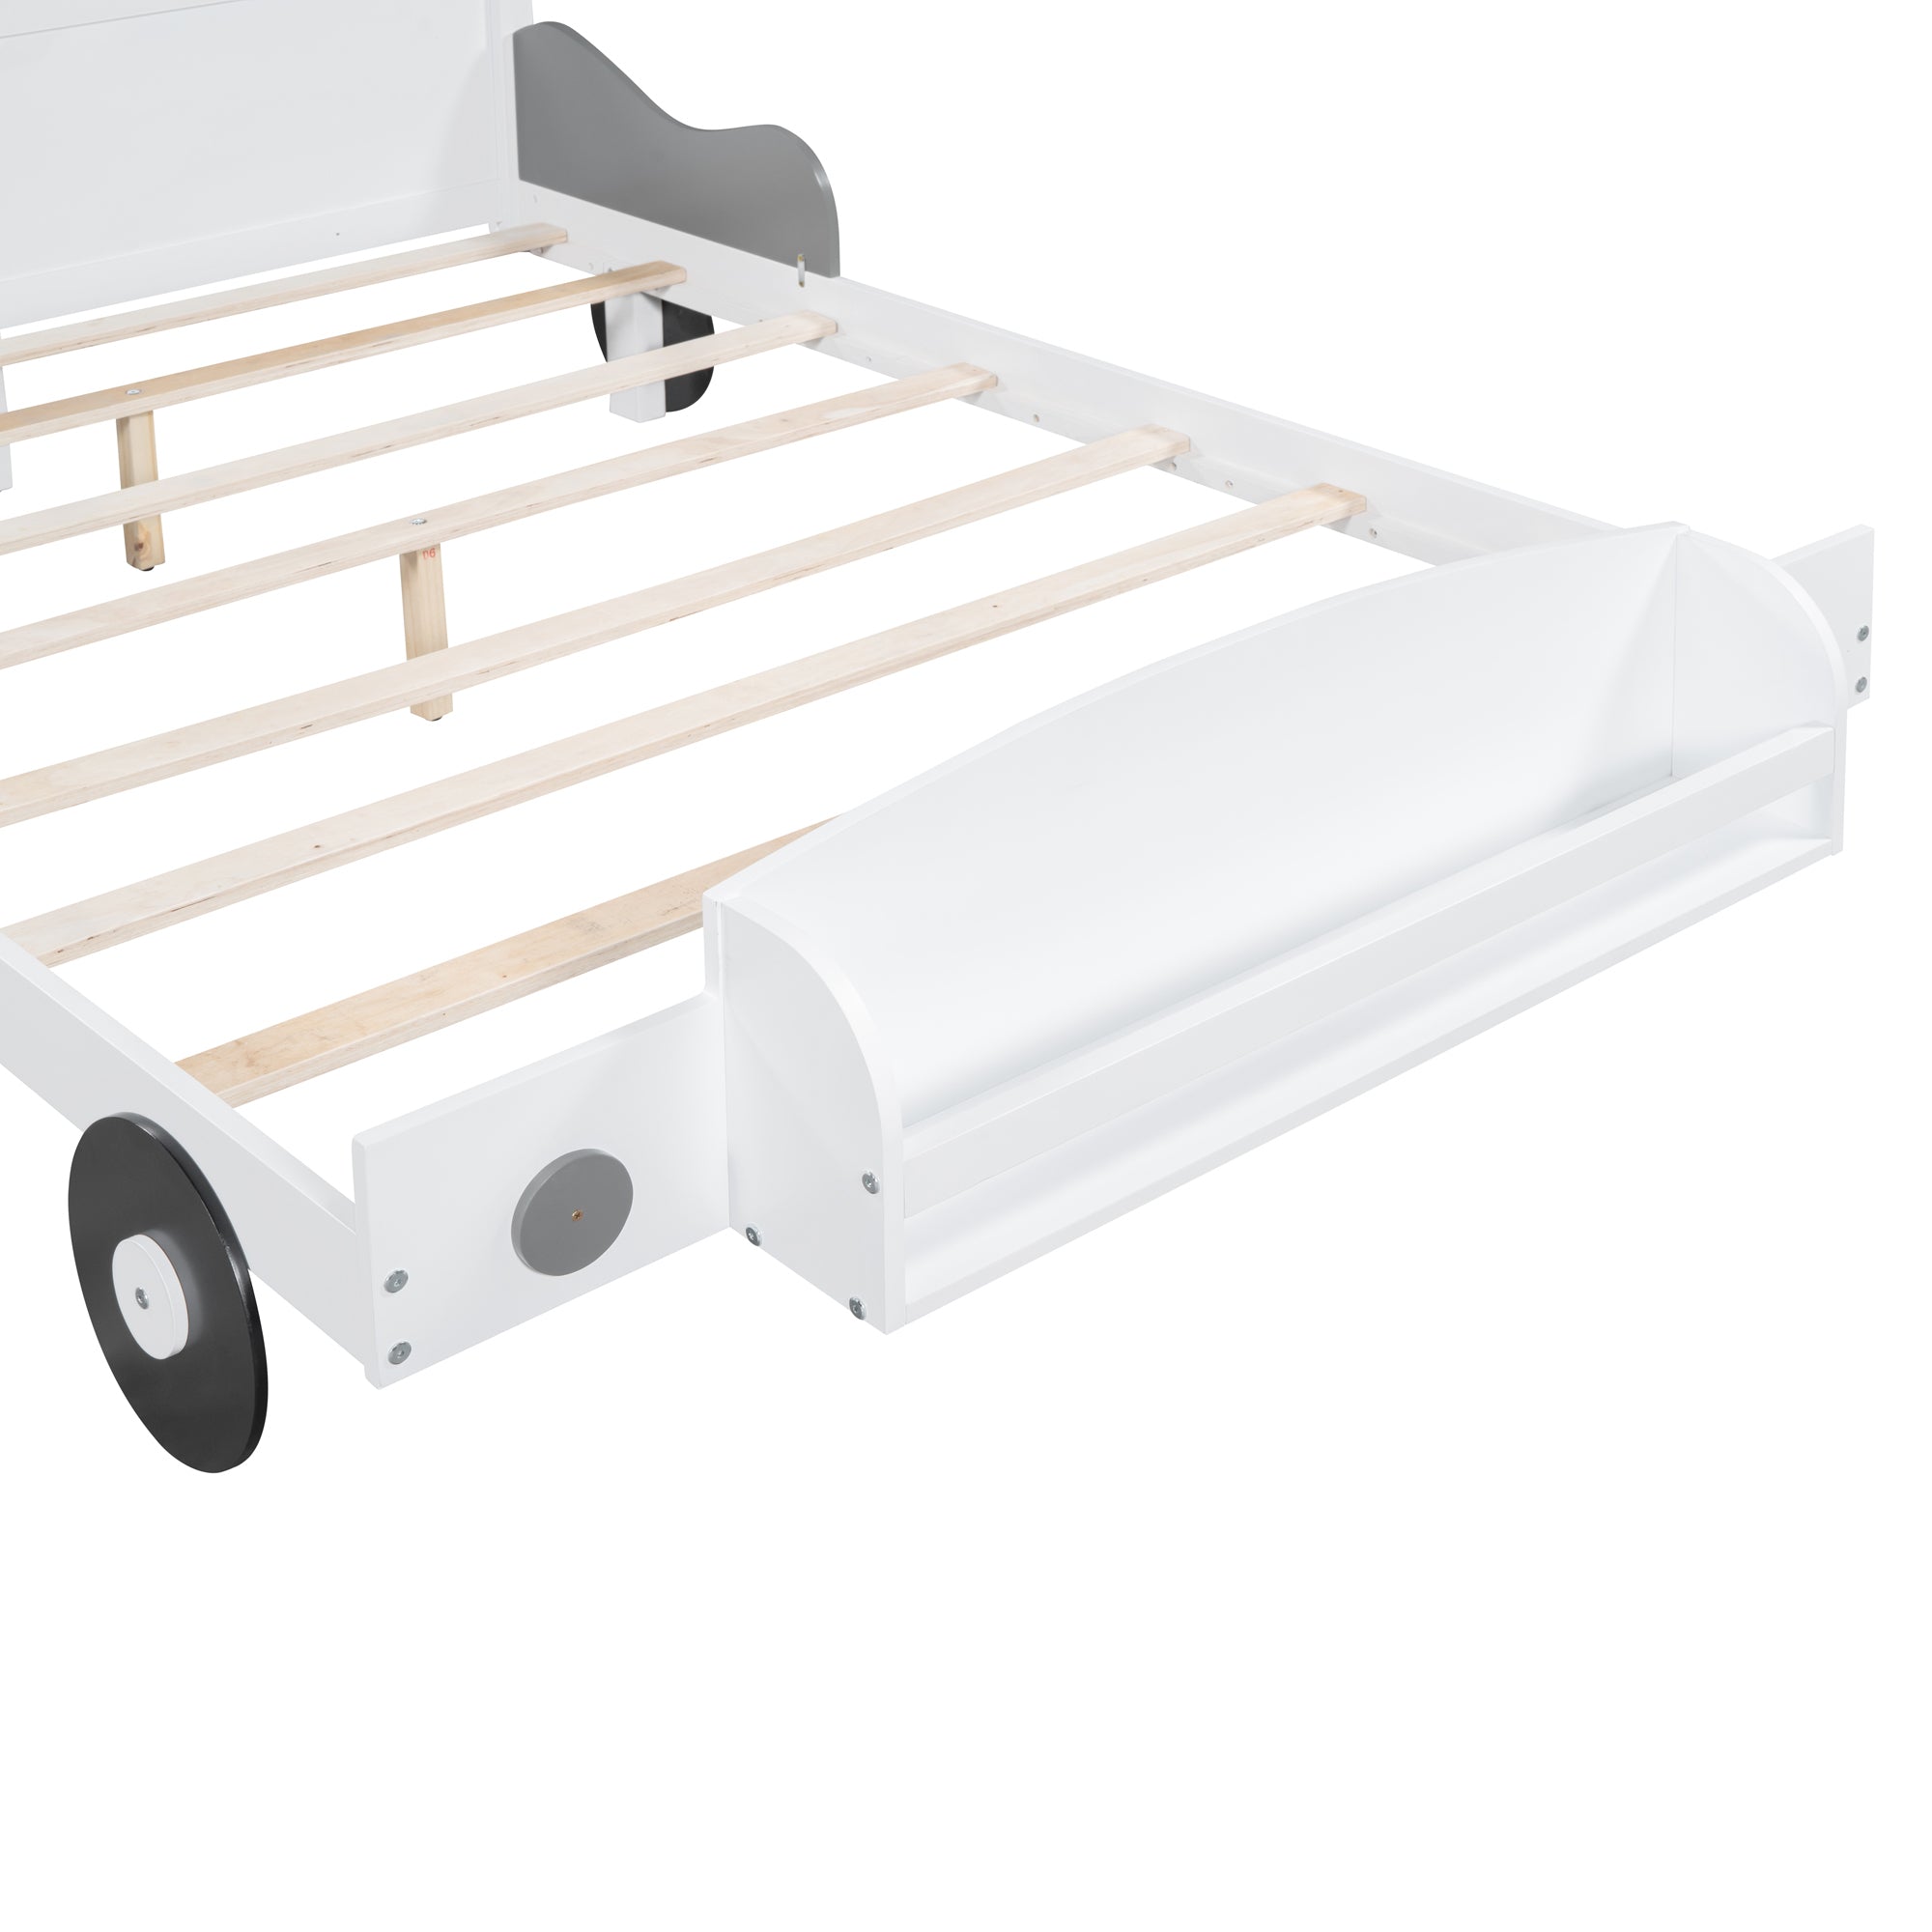 Full Size Car Shaped Platform Bed,Full Bed with white-wood